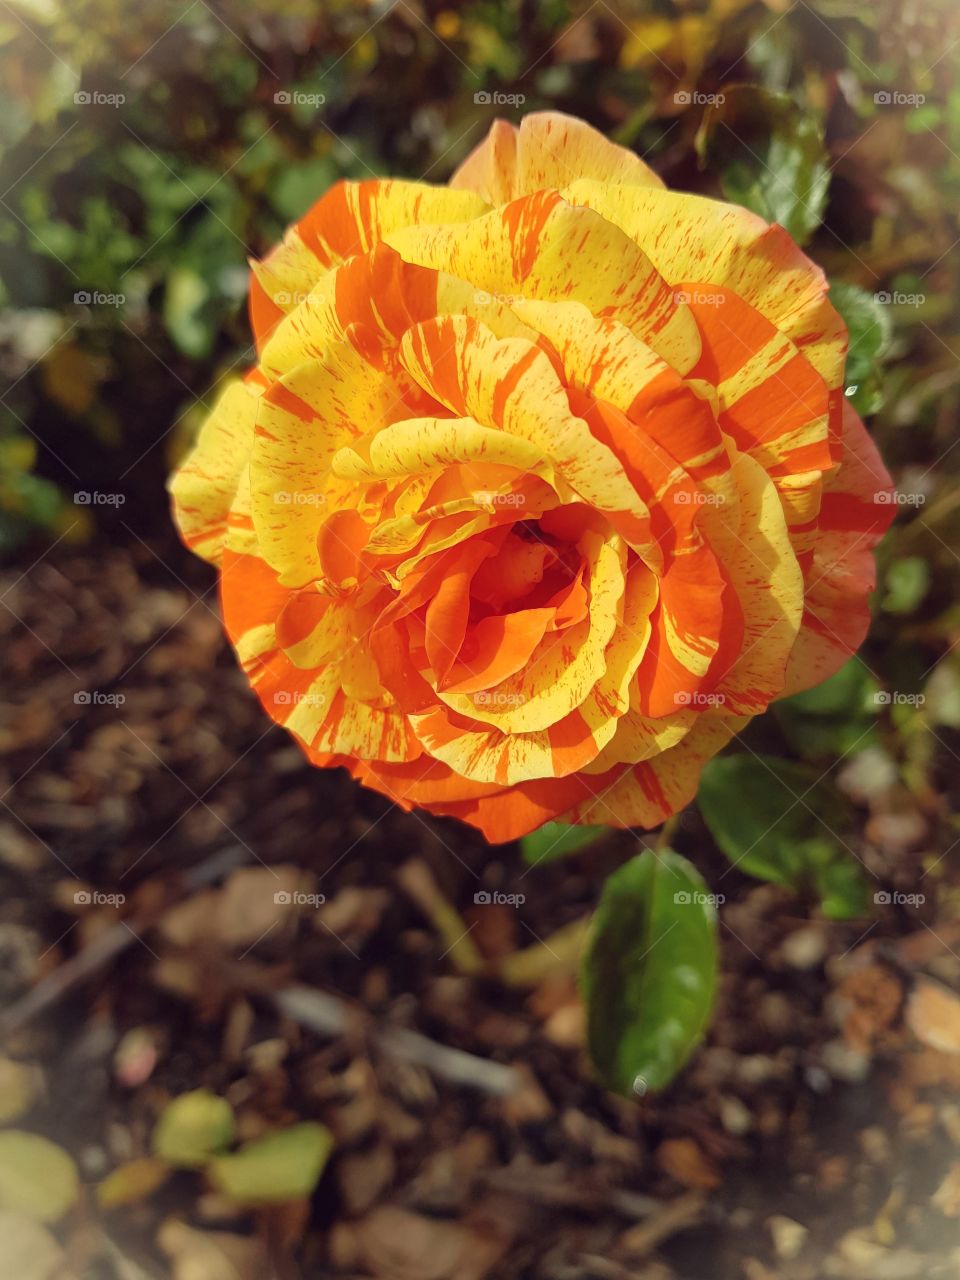 Goodness brightness me!! Strong beautiful colors Orange and yellow combined. Natures magic creates beautiful Rose's.